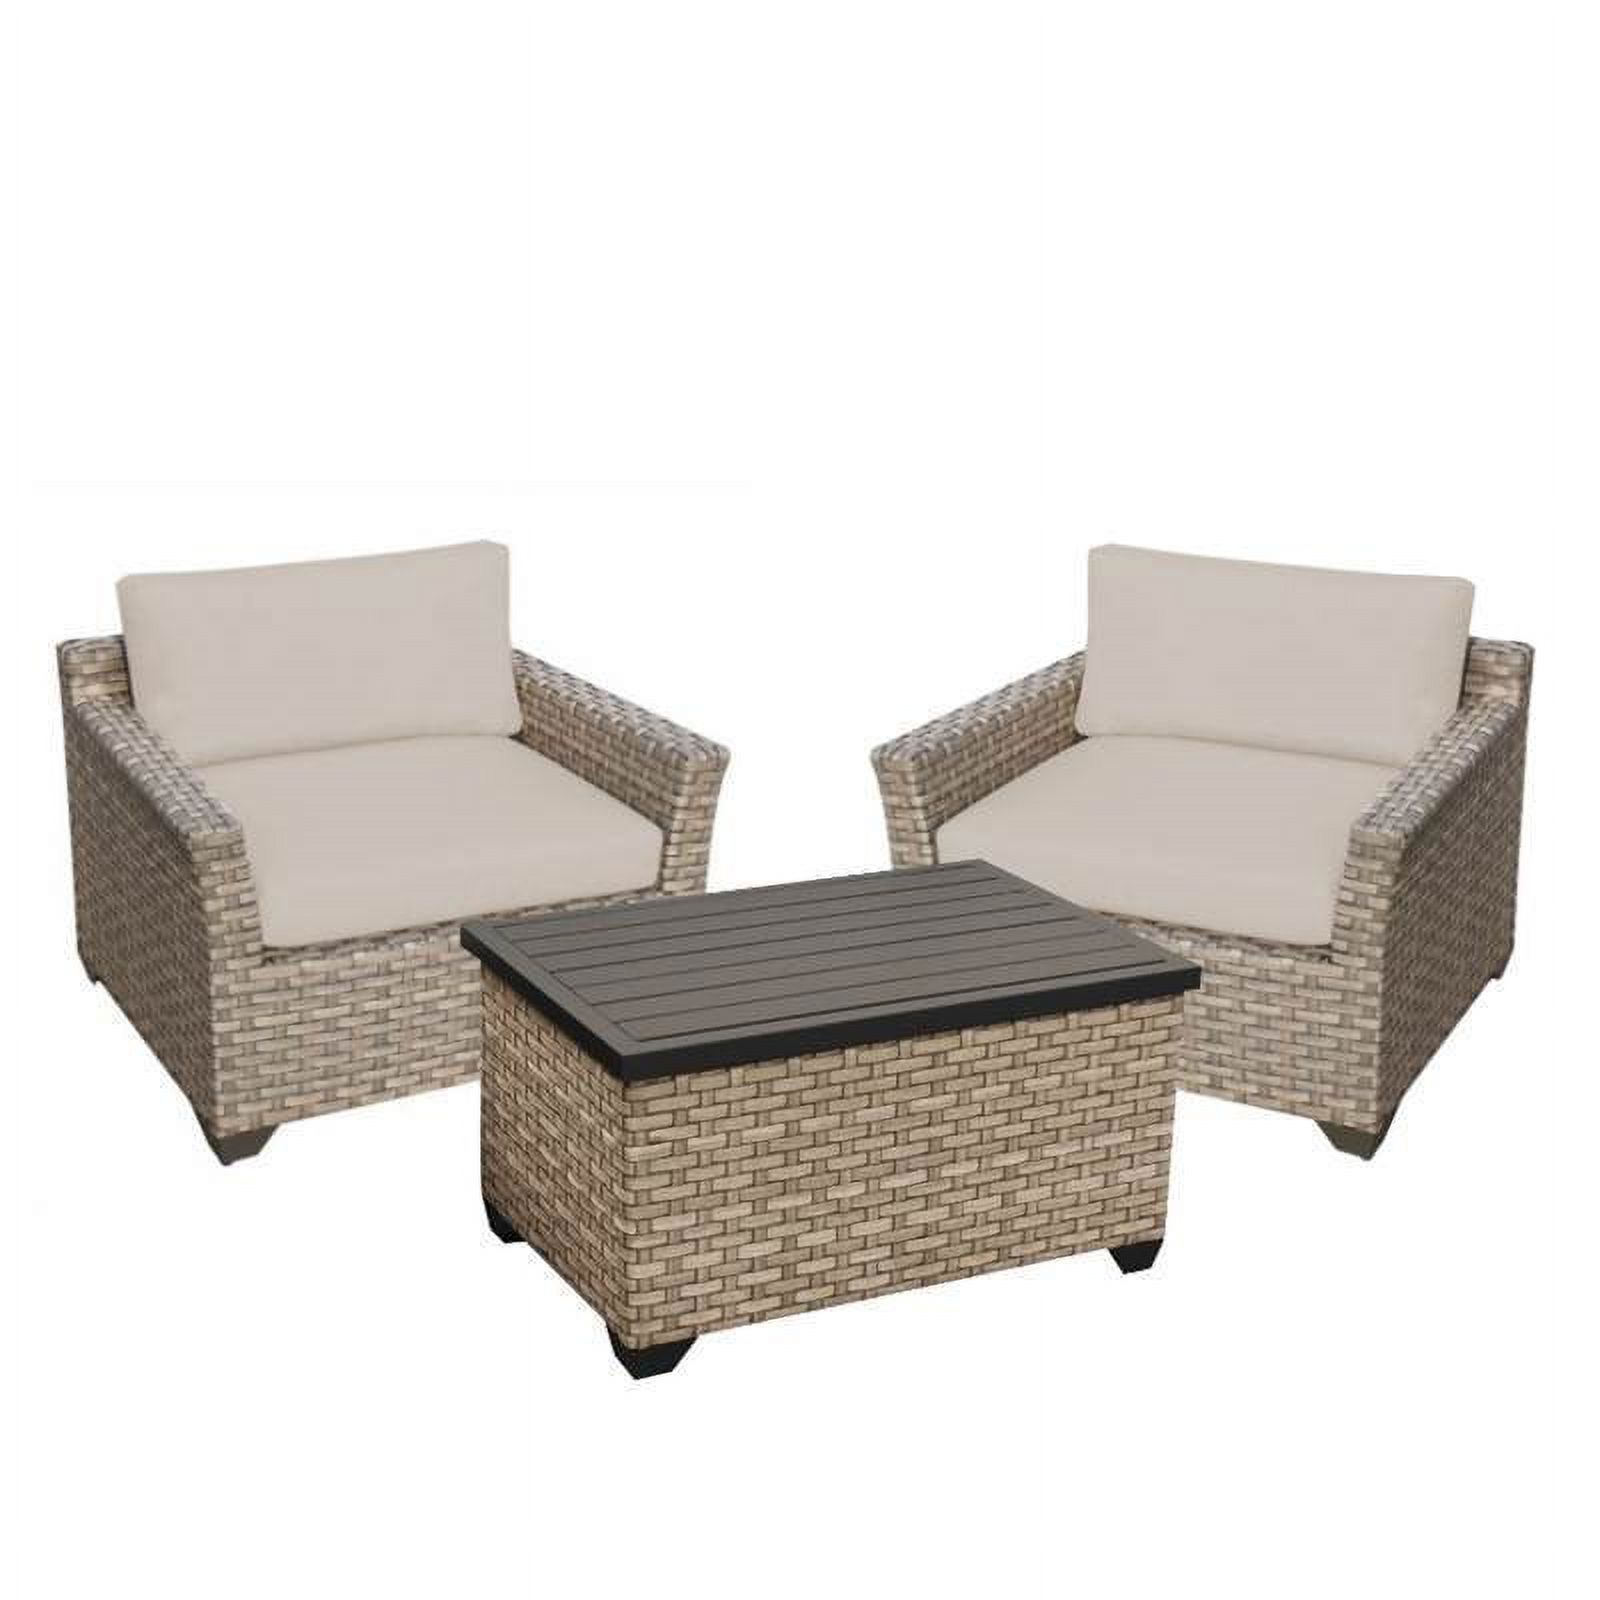 3 Piece Patio Furniture Set with Wickered Set of 2 Arm Chairs and Coffee Table in Summer Fog - image 1 of 4